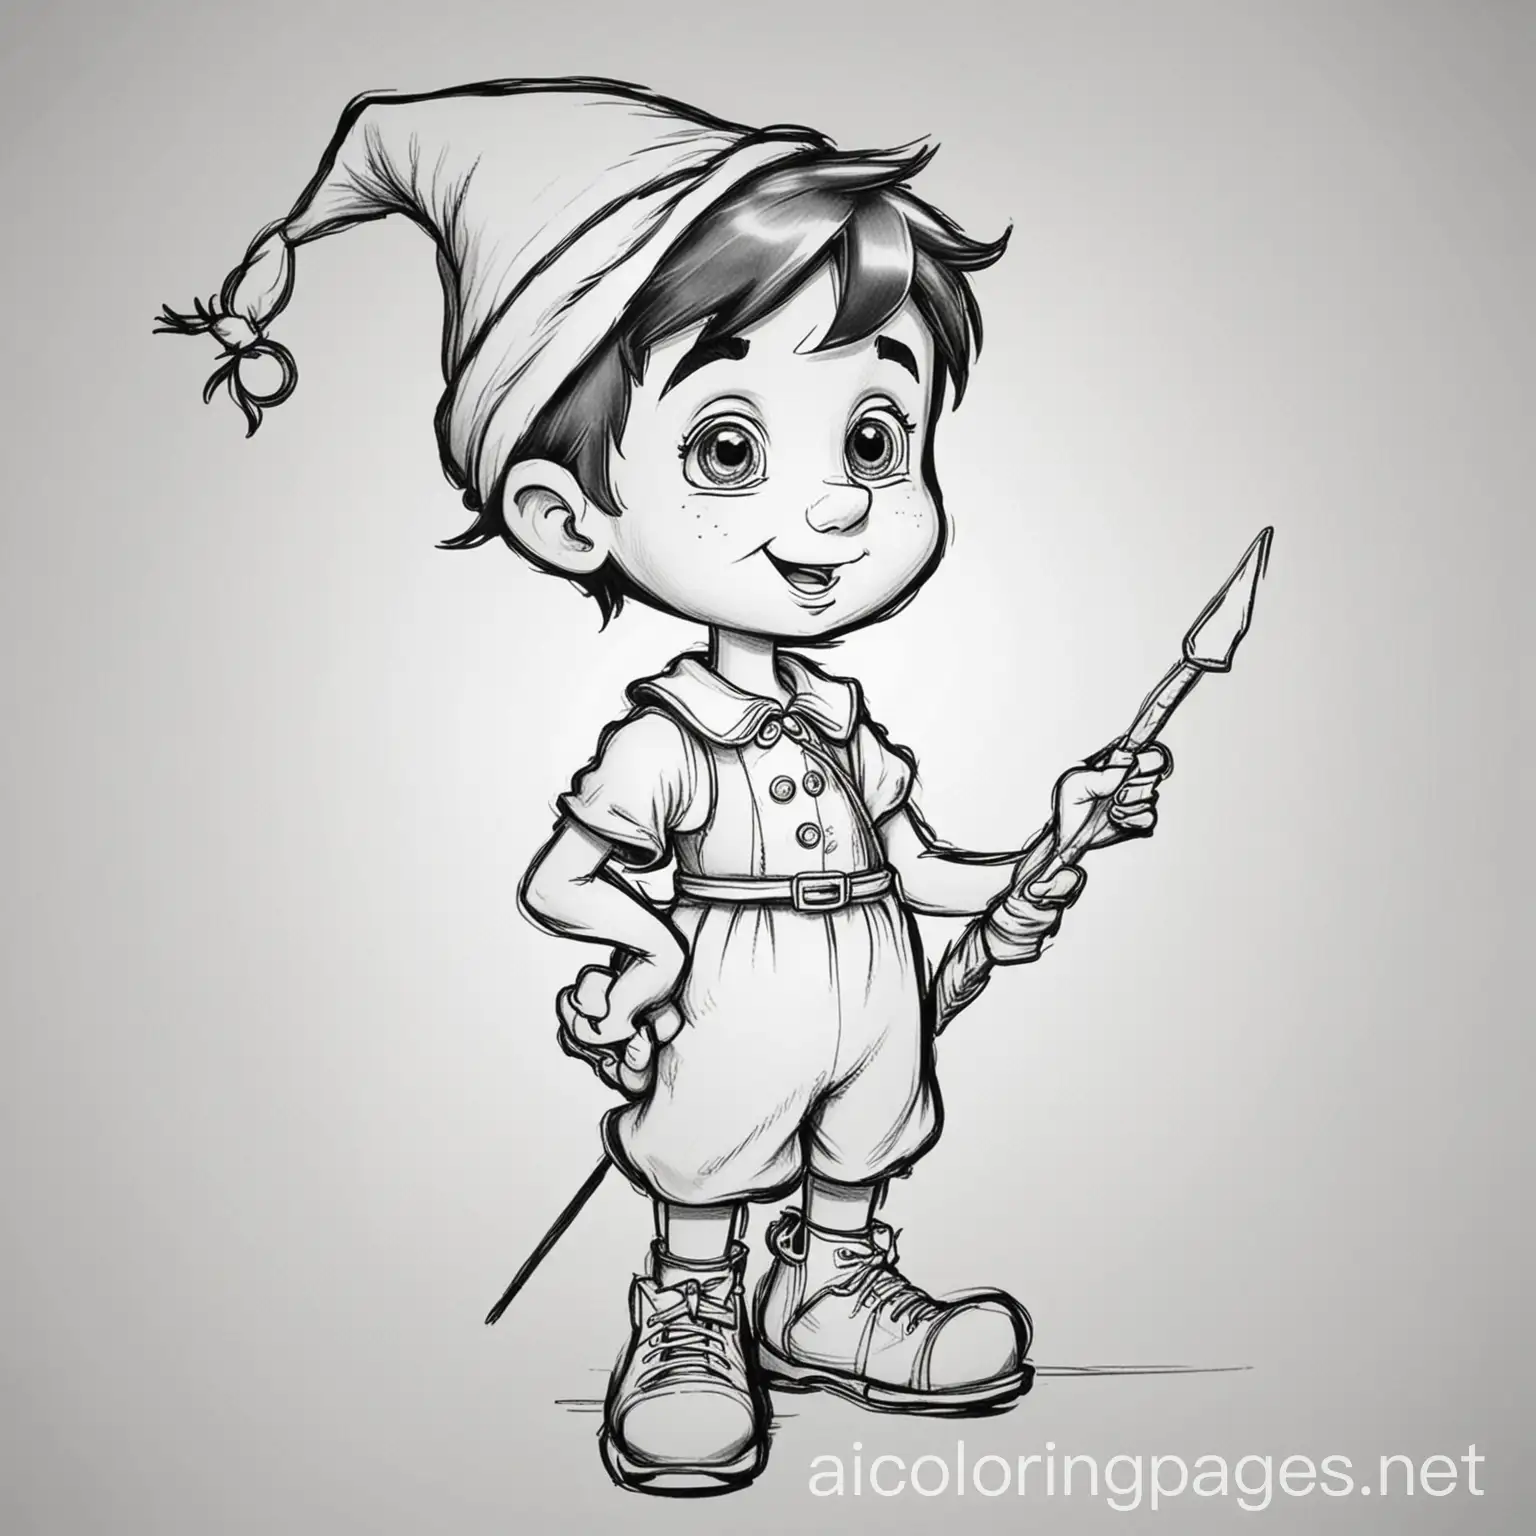 the story of Pinocchio, Coloring Page, black and white, line art, white background, Simplicity, Ample White Space. The background of the coloring page is plain white to make it easy for young children to color within the lines. The outlines of all the subjects are easy to distinguish, making it simple for kids to color without too much difficulty